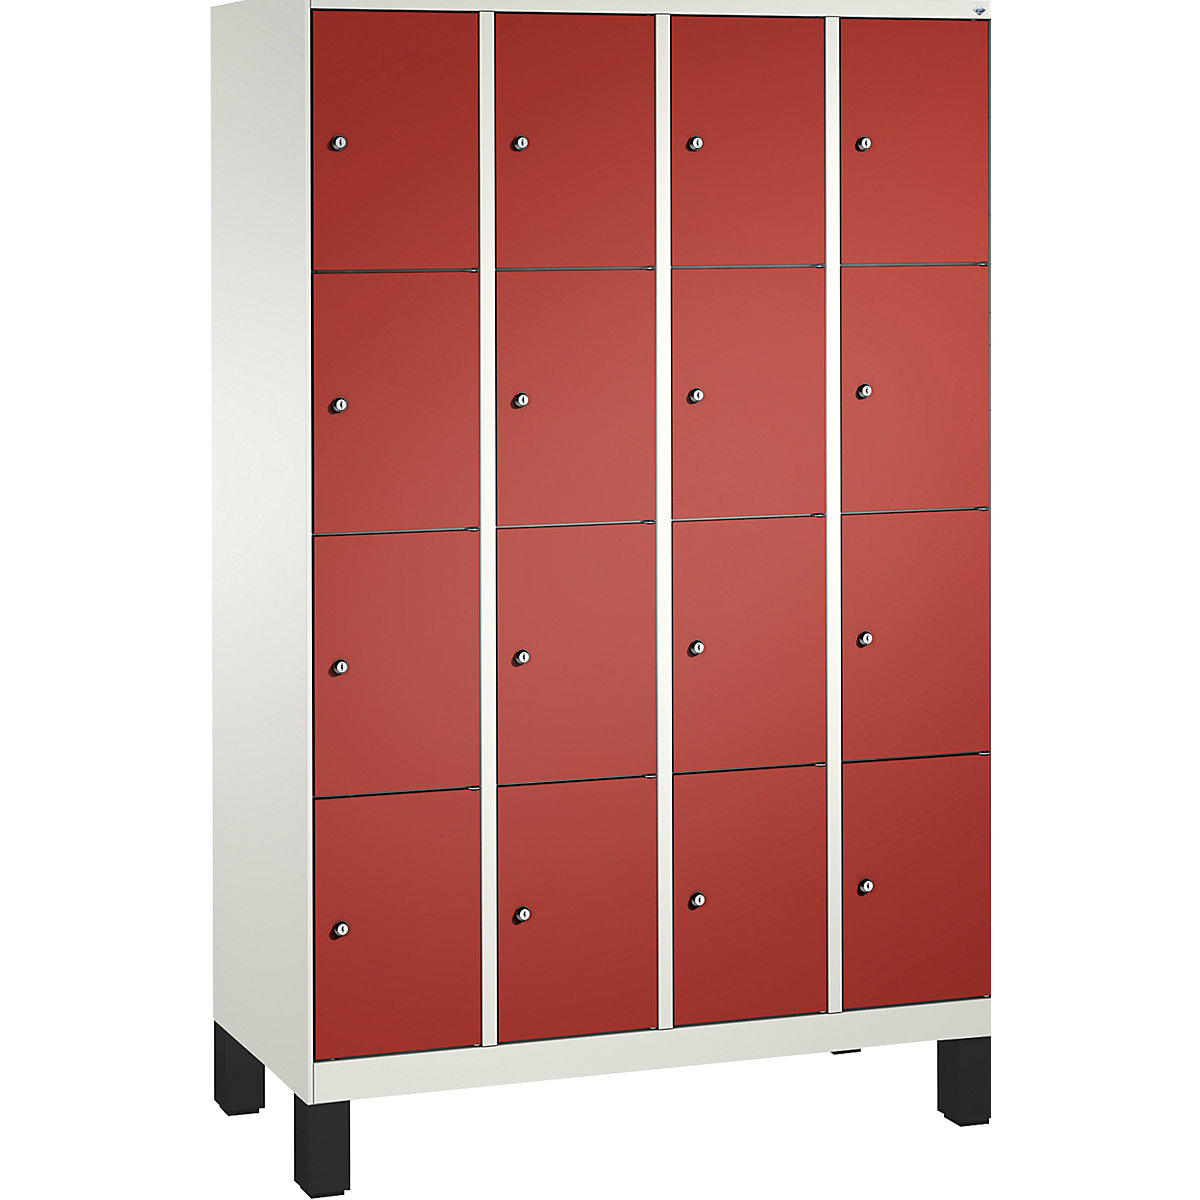 EVOLO locker unit, with feet – C+P, 4 compartments, 4 shelf compartments each, compartment width 300 mm, traffic white / flame red-5